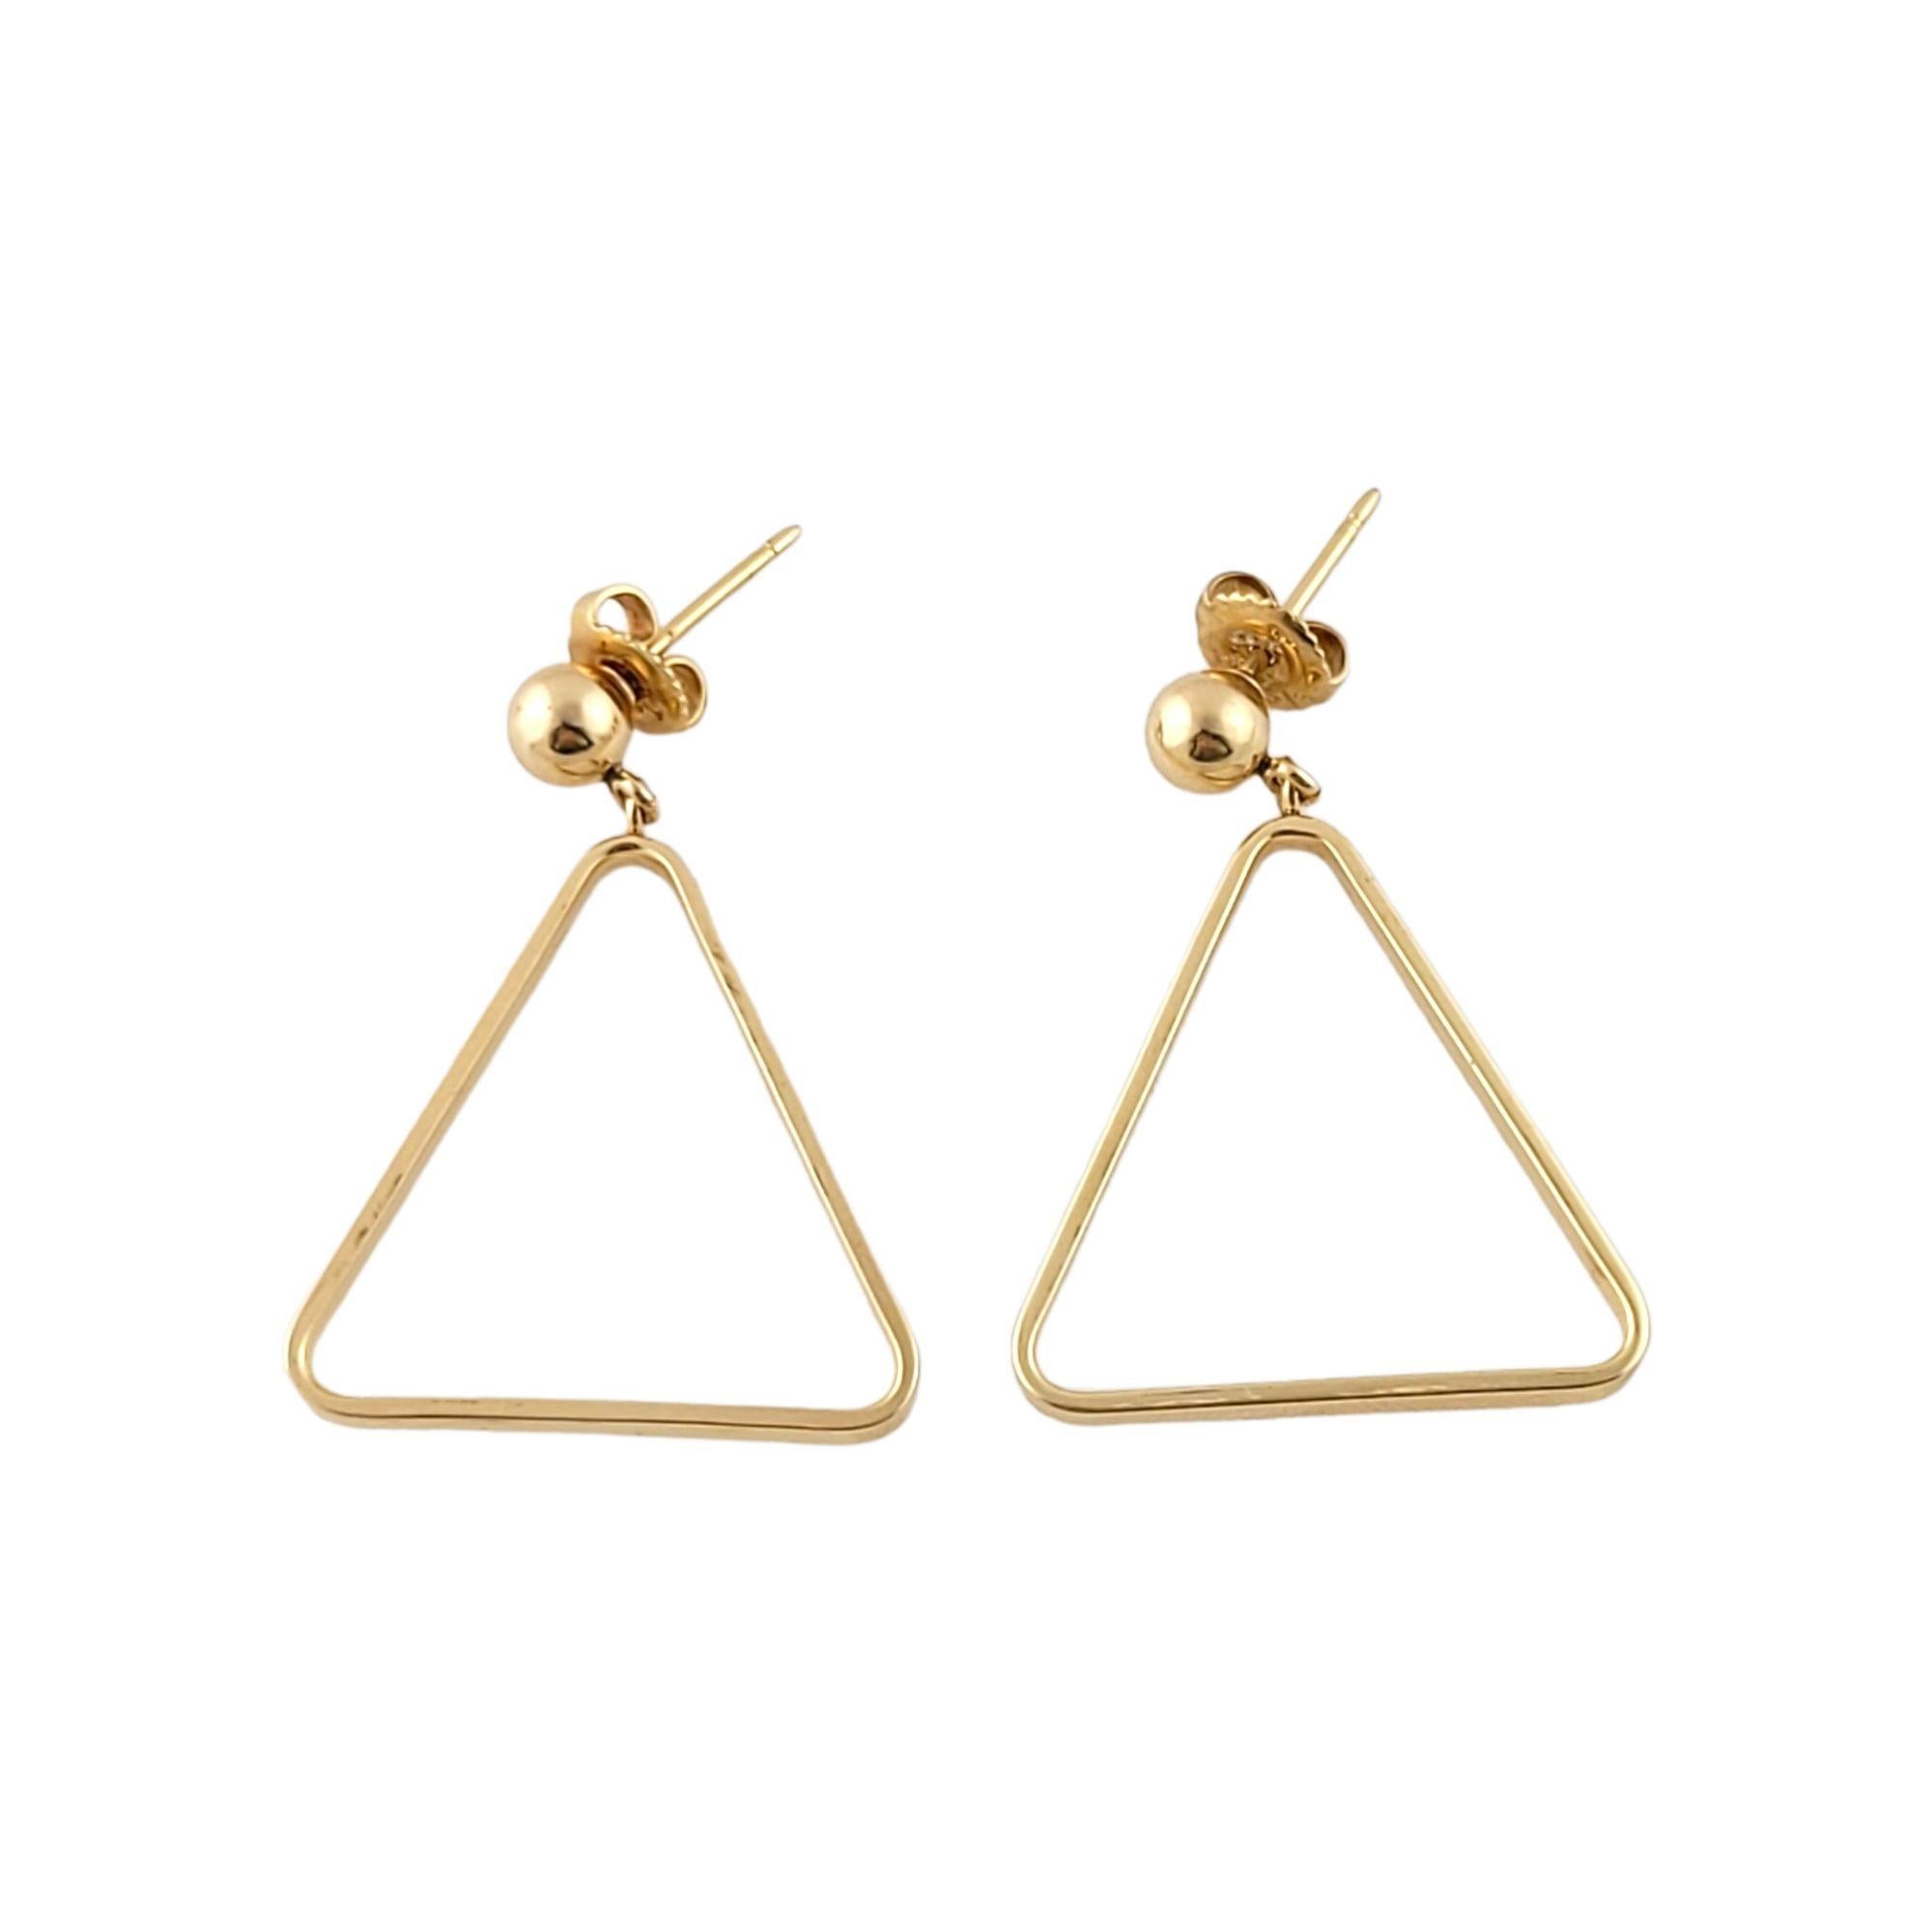 Vintage 14K Yellow Gold Triangle Earrings

Gorgeous set of gold triangle earrings!

Size: 34mm X 25mm X 2mm

Weight: 5.8 gr/ 3.7 dwt

Tested 14K

Very good condition, professionally polished.

Will come packaged in a gift box or pouch (when